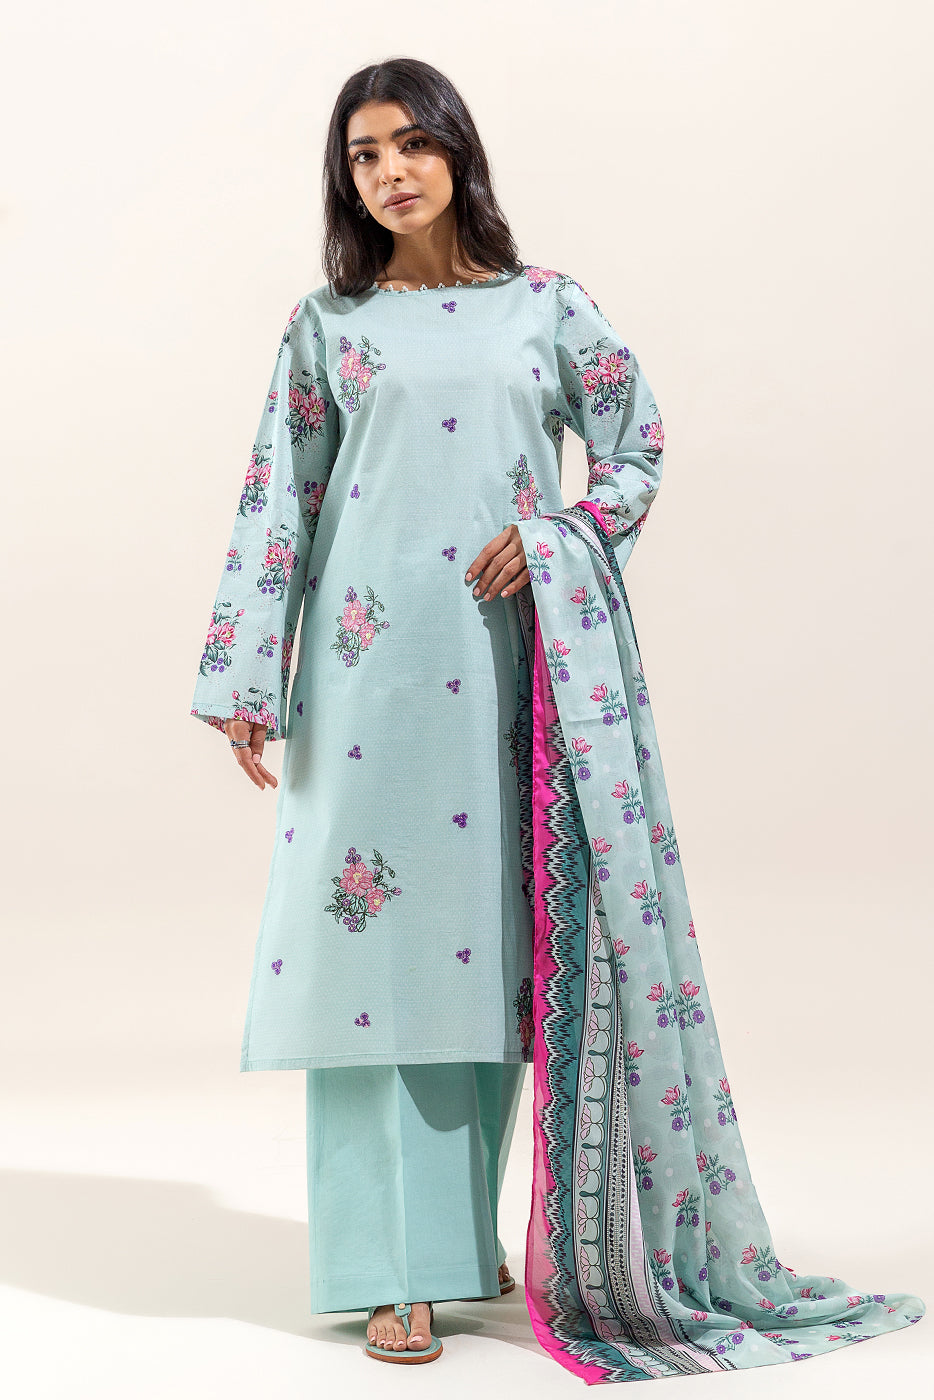 3 PIECE EMBROIDERED LAWN SUIT-PASTEL ORCHID (UNSTITCHED)